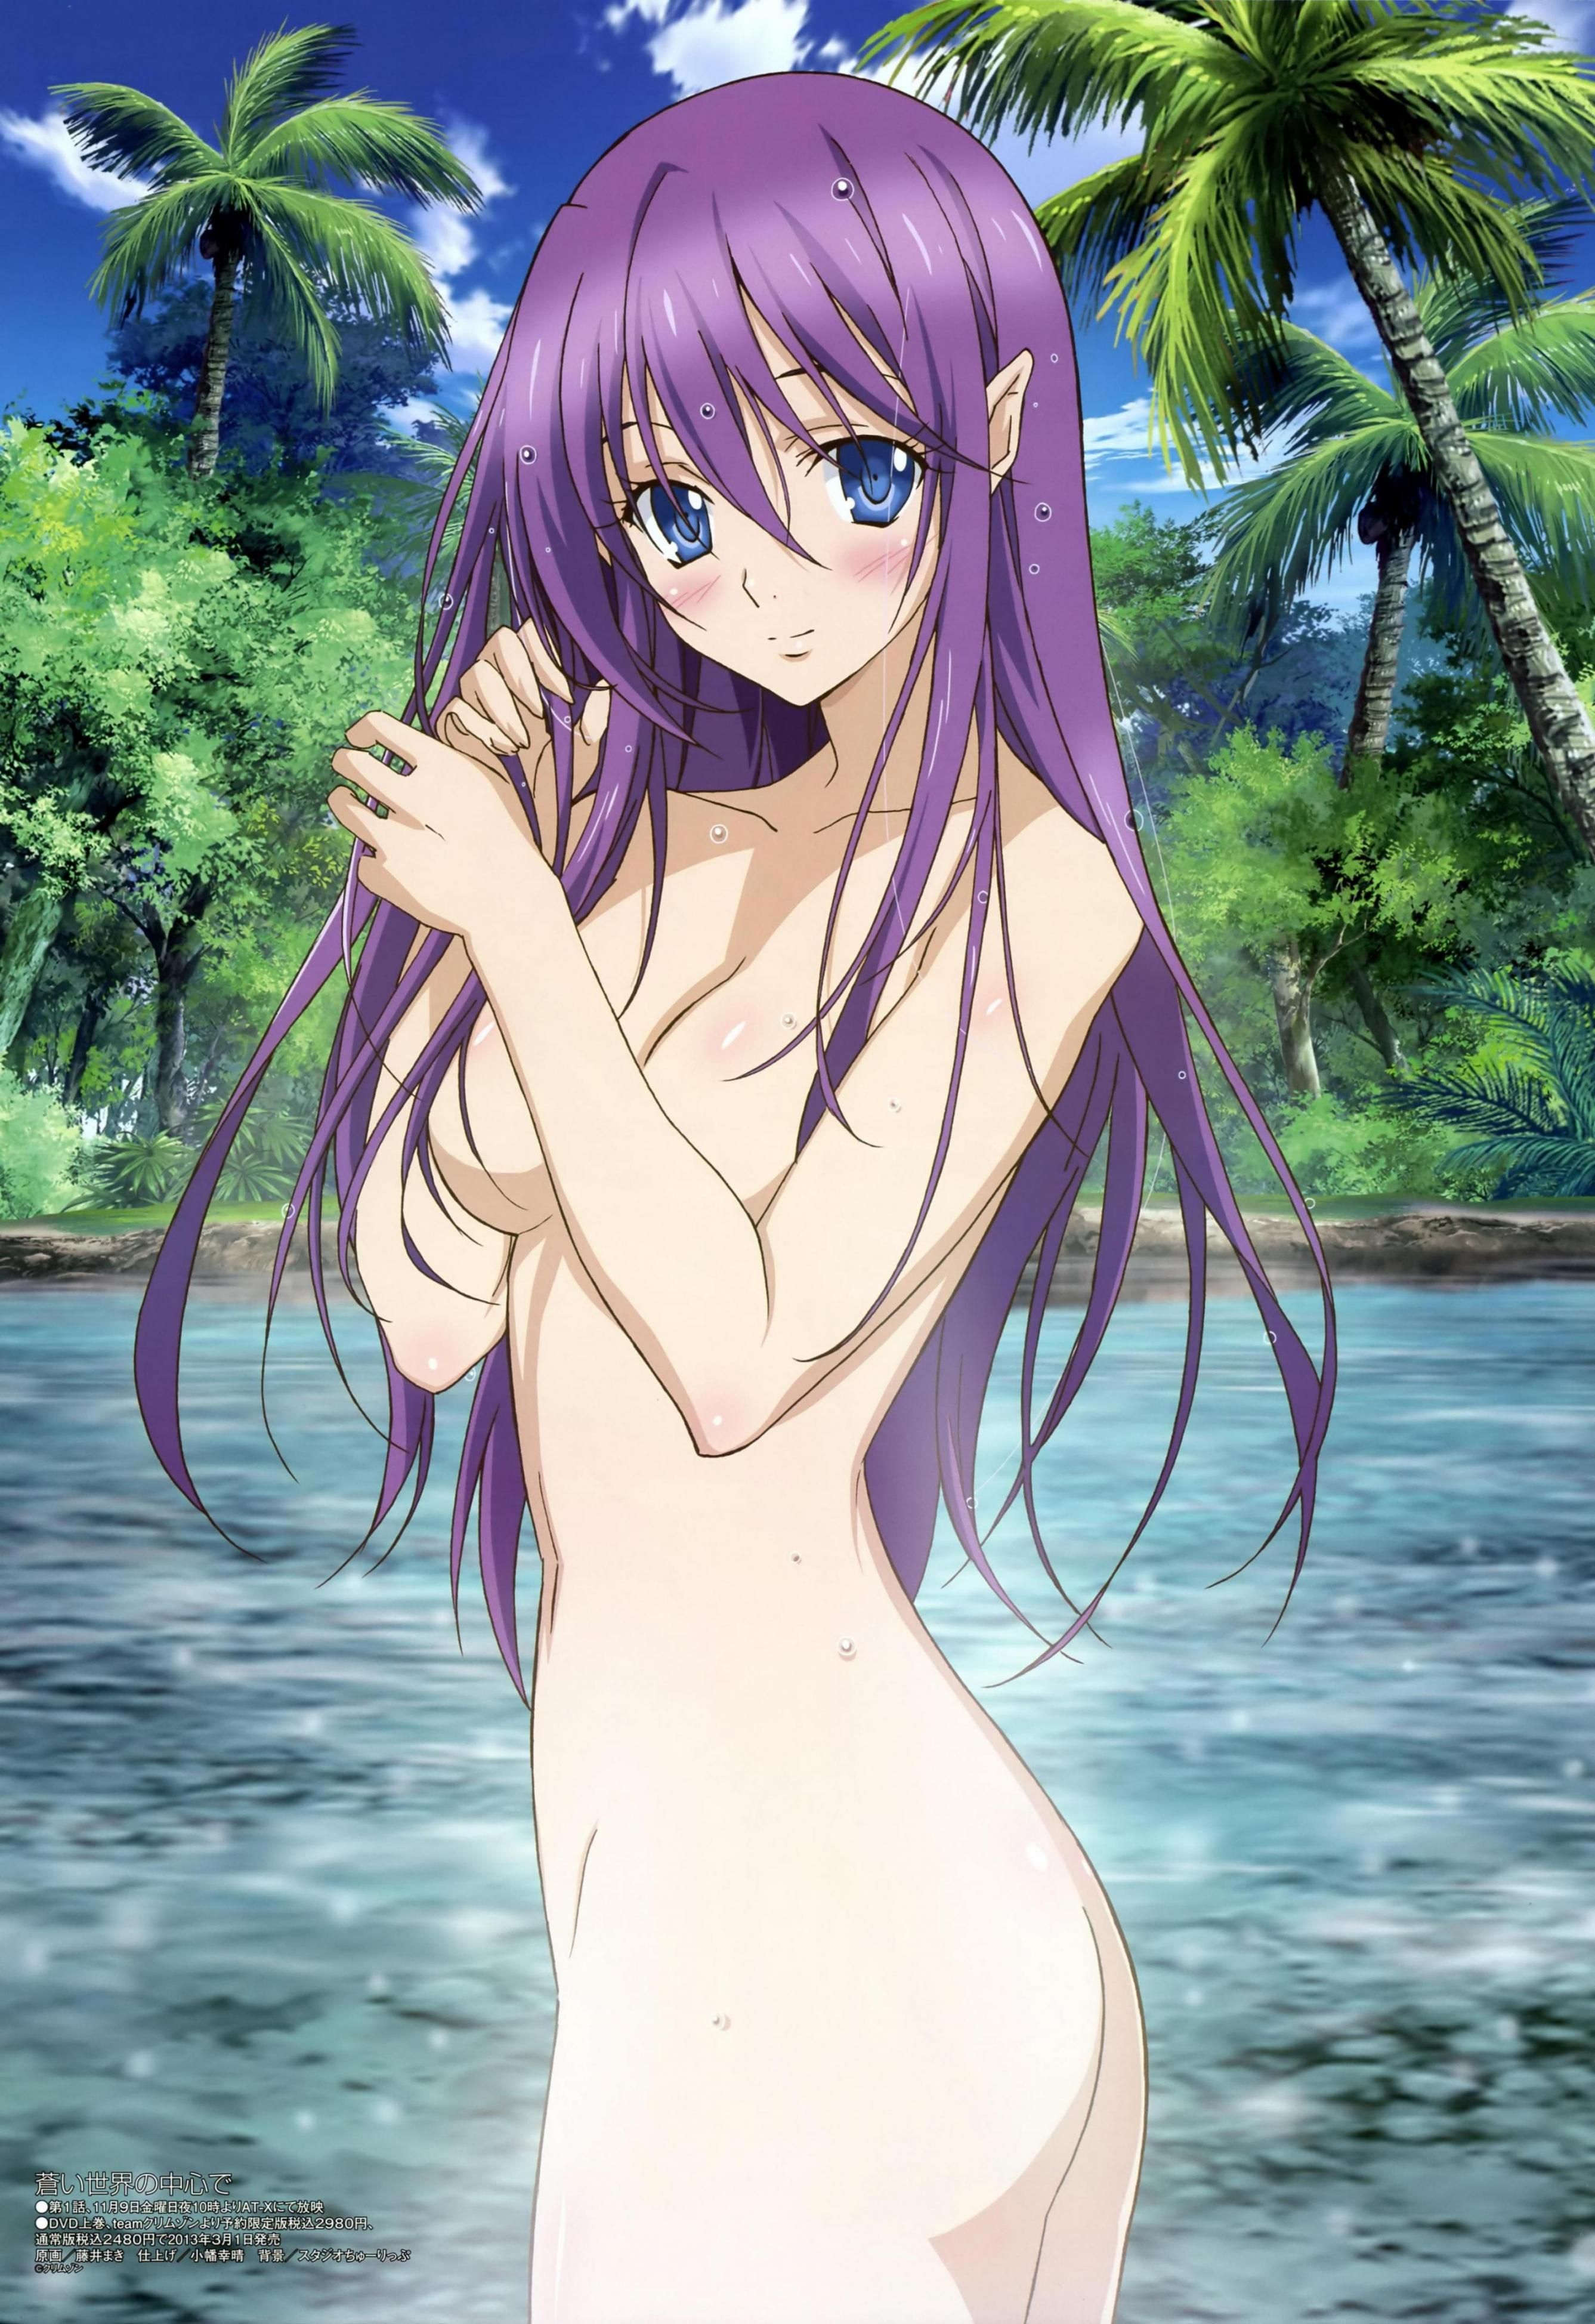 Naked image summary of 2D naughty beautiful girl Part 2 6